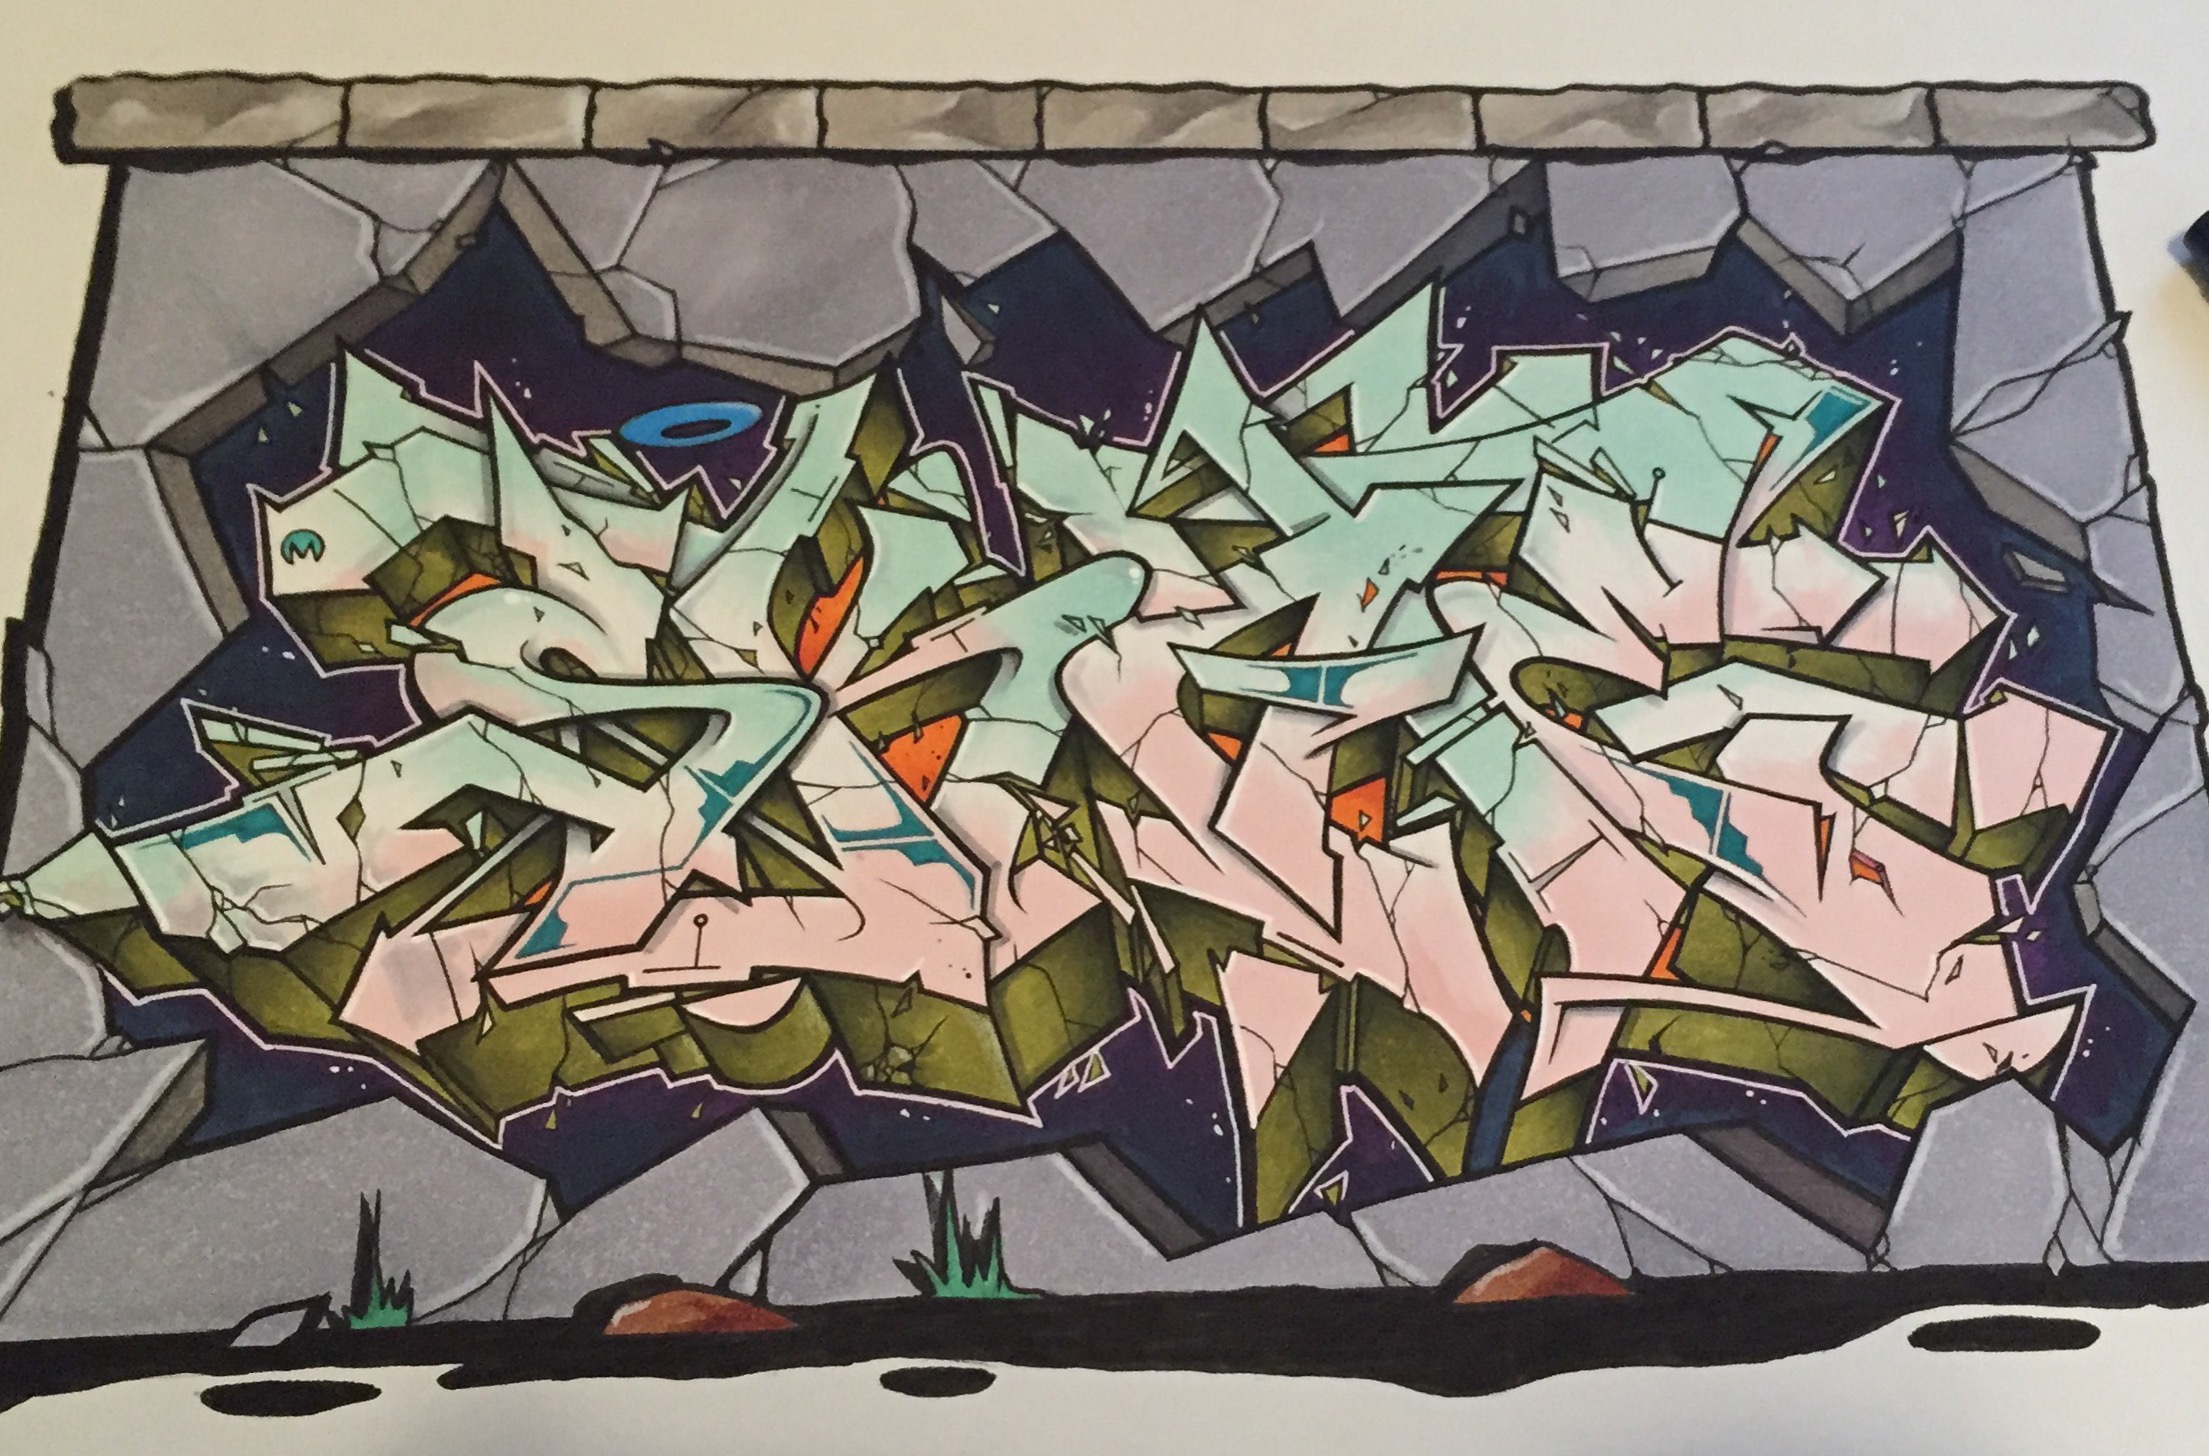 SKAE Exchange by Nover, markers & pen on paper. 